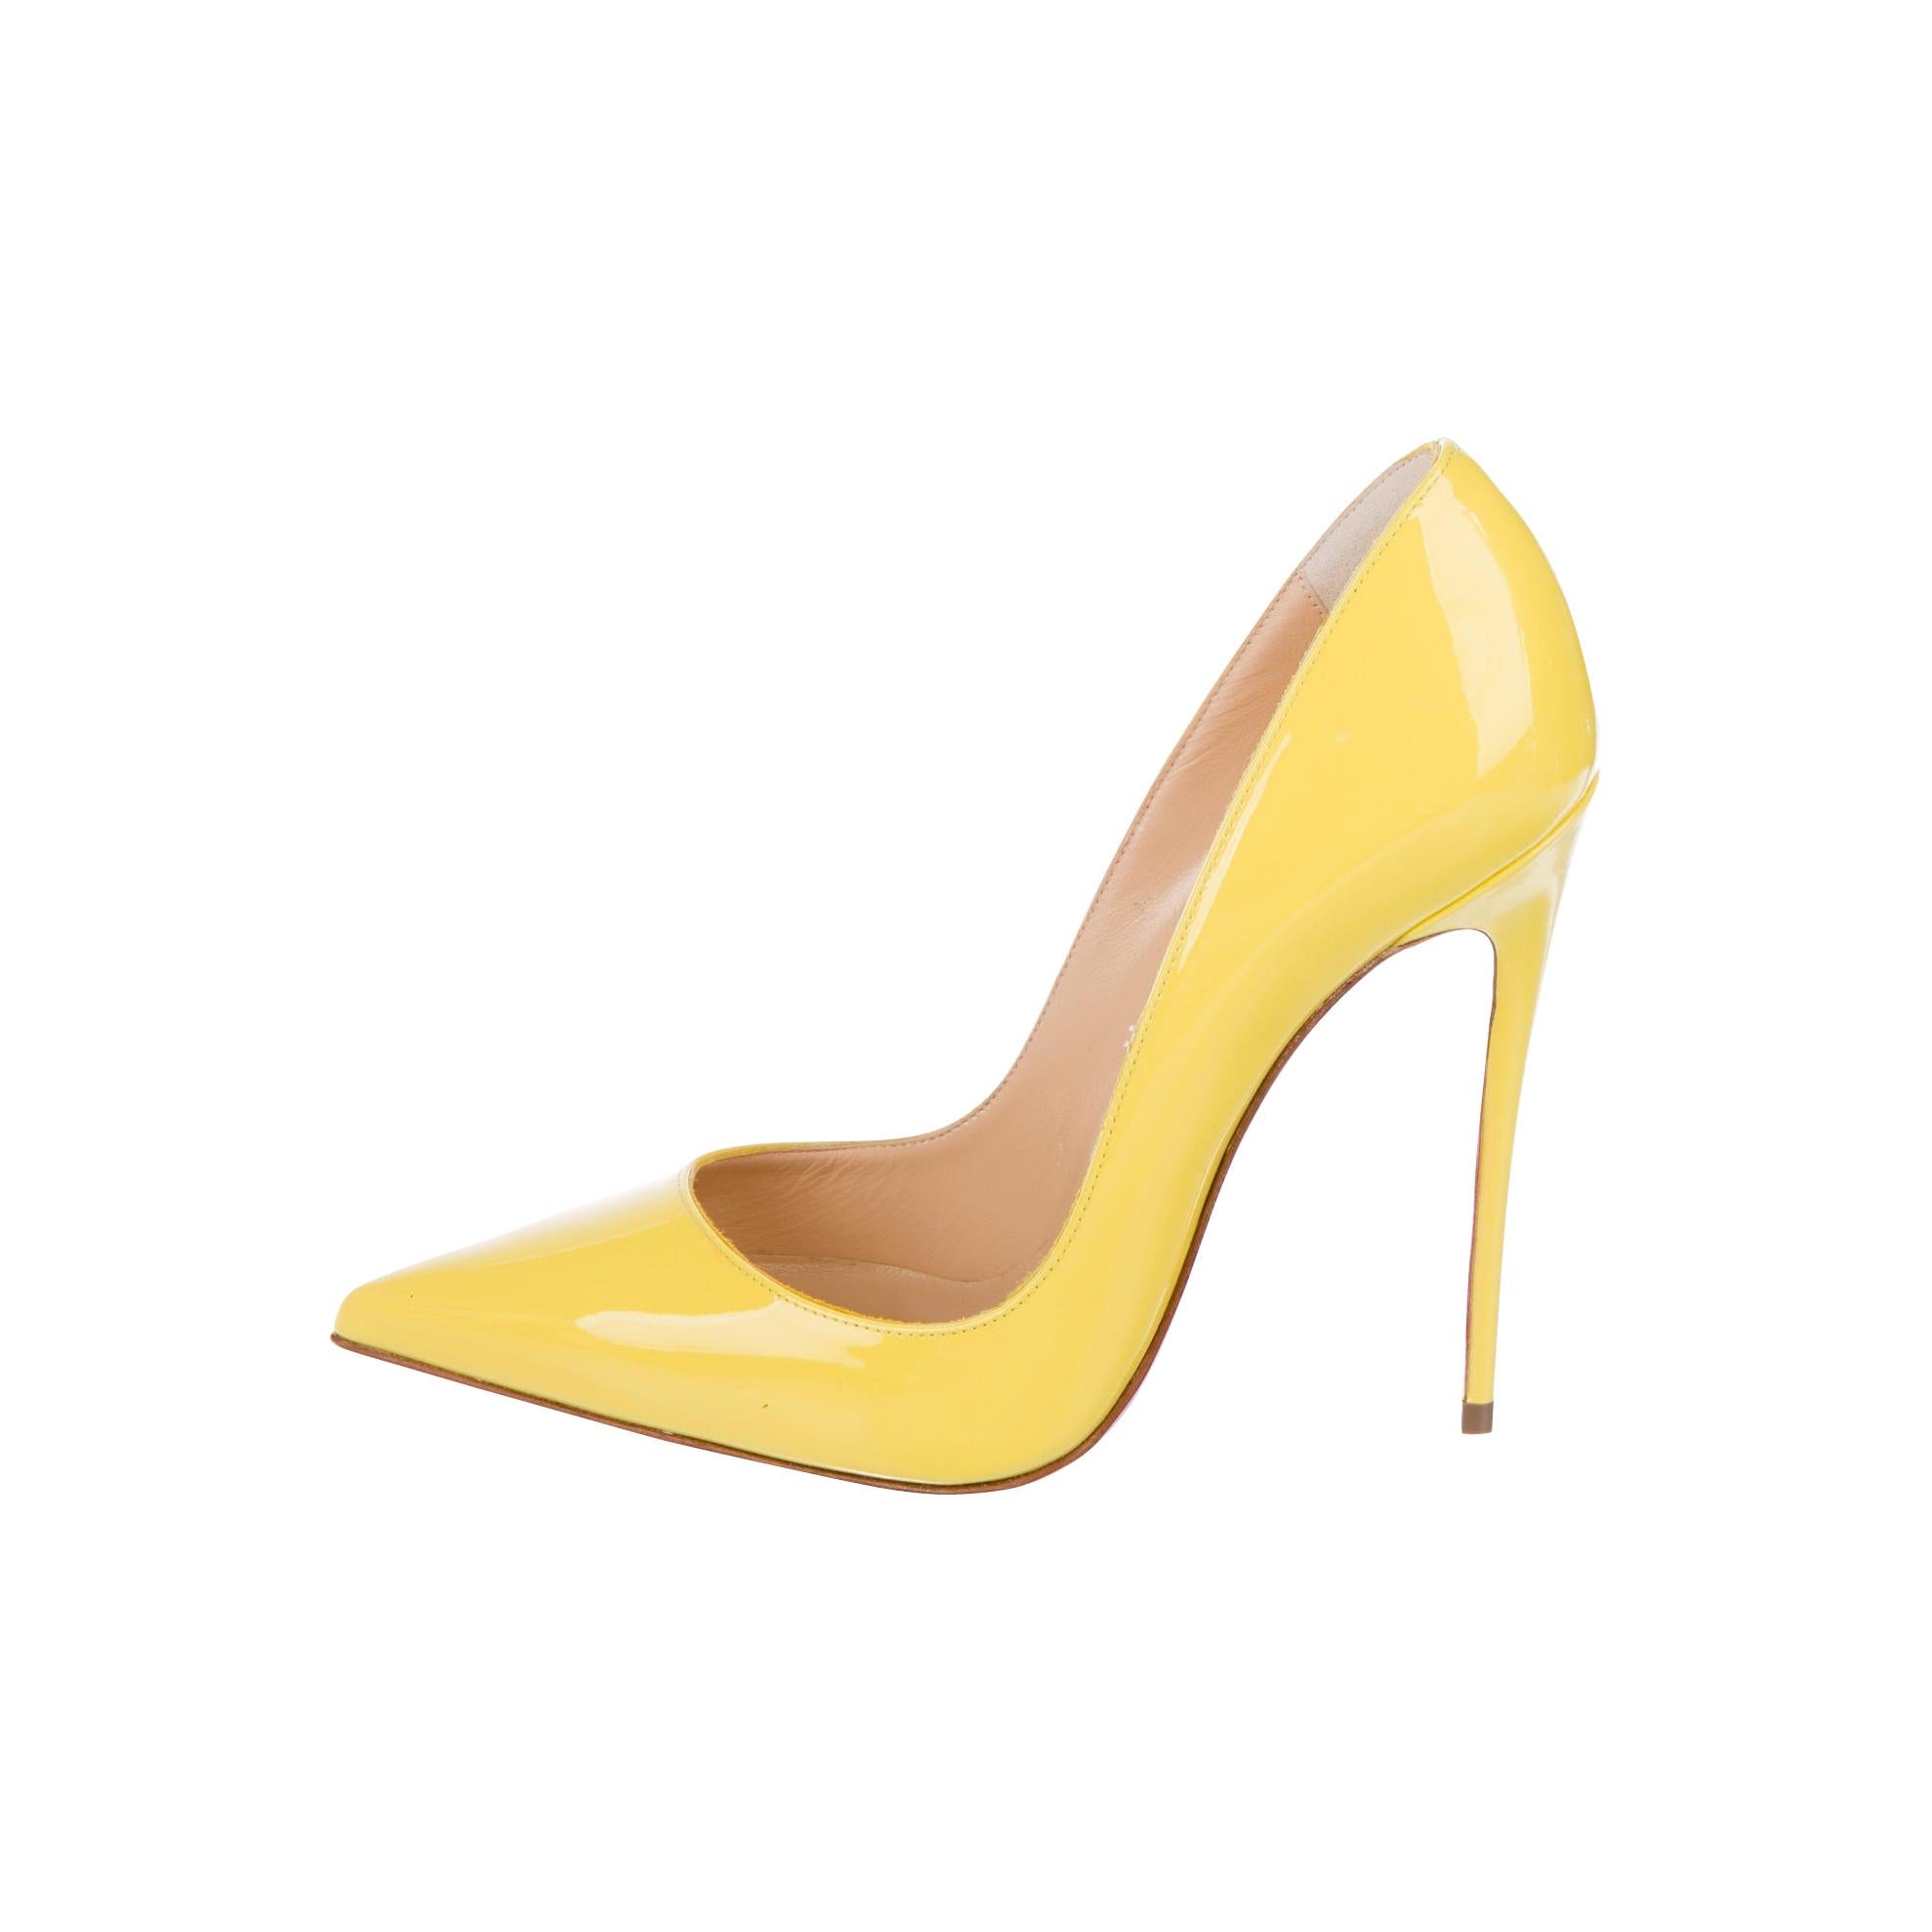 Christian Louboutin NEW Yellow Patent Leather So Kate High Heels Pumps in Box